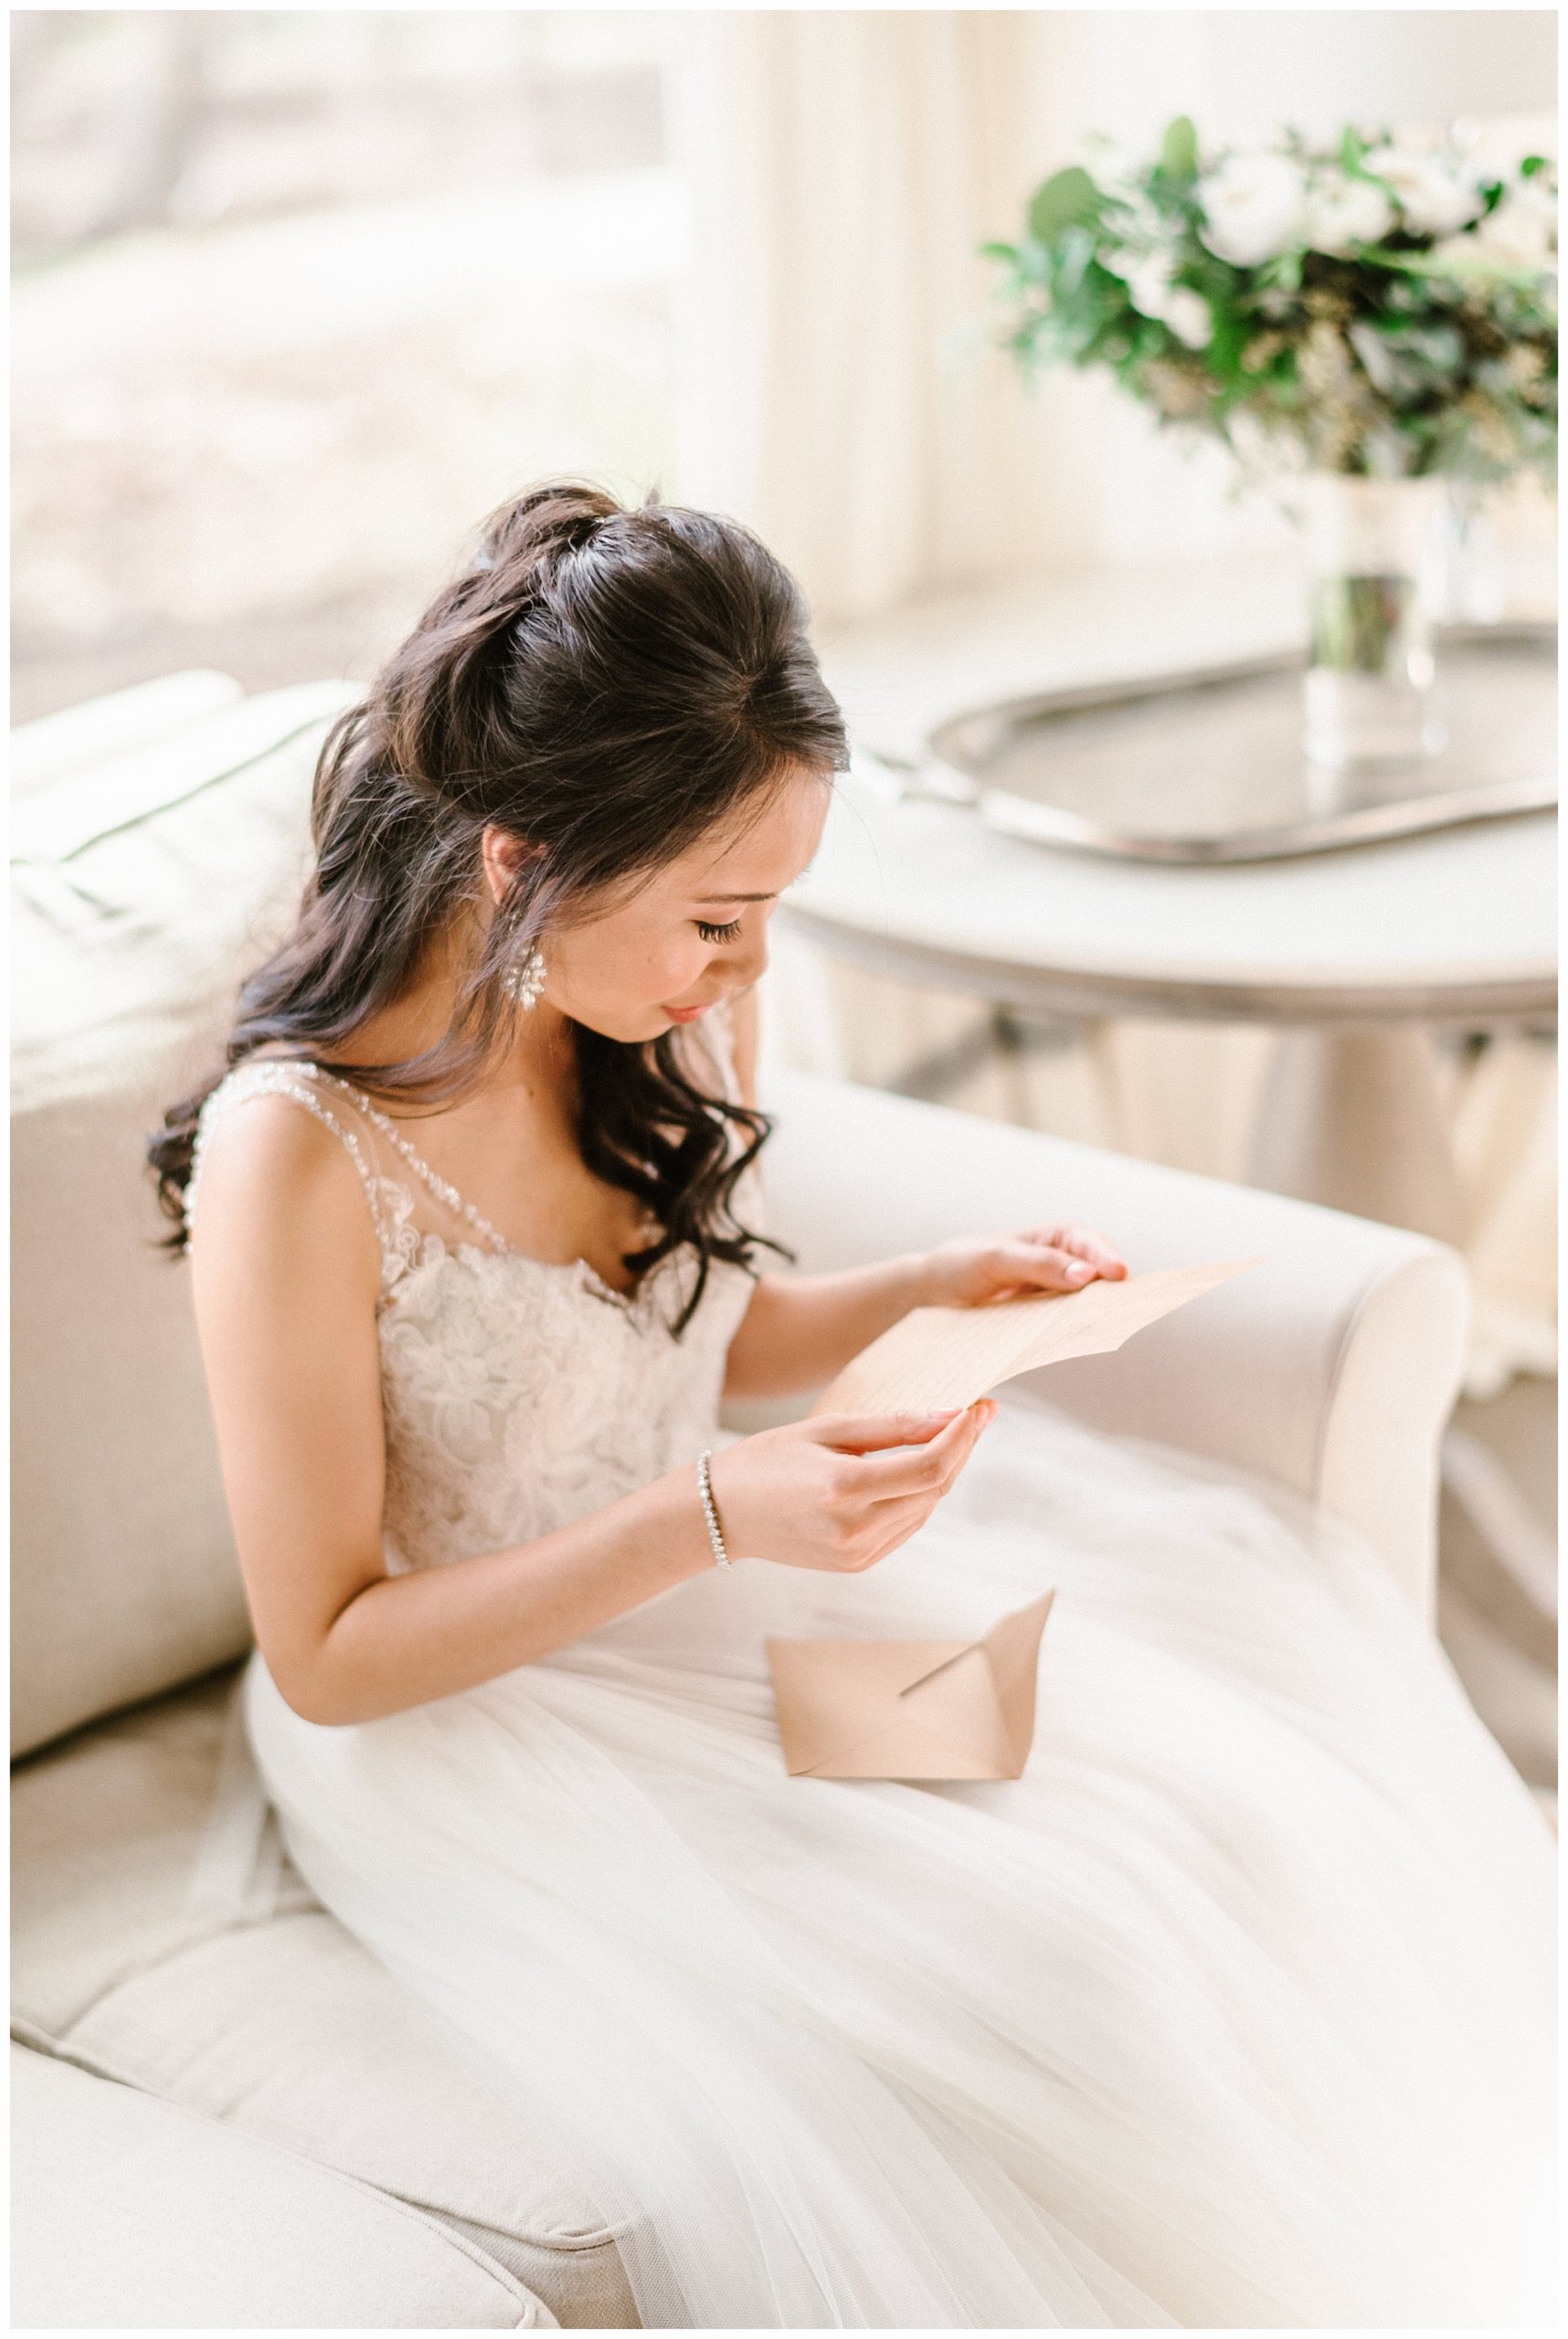 Emotional Bride Reading a letter from her Groom